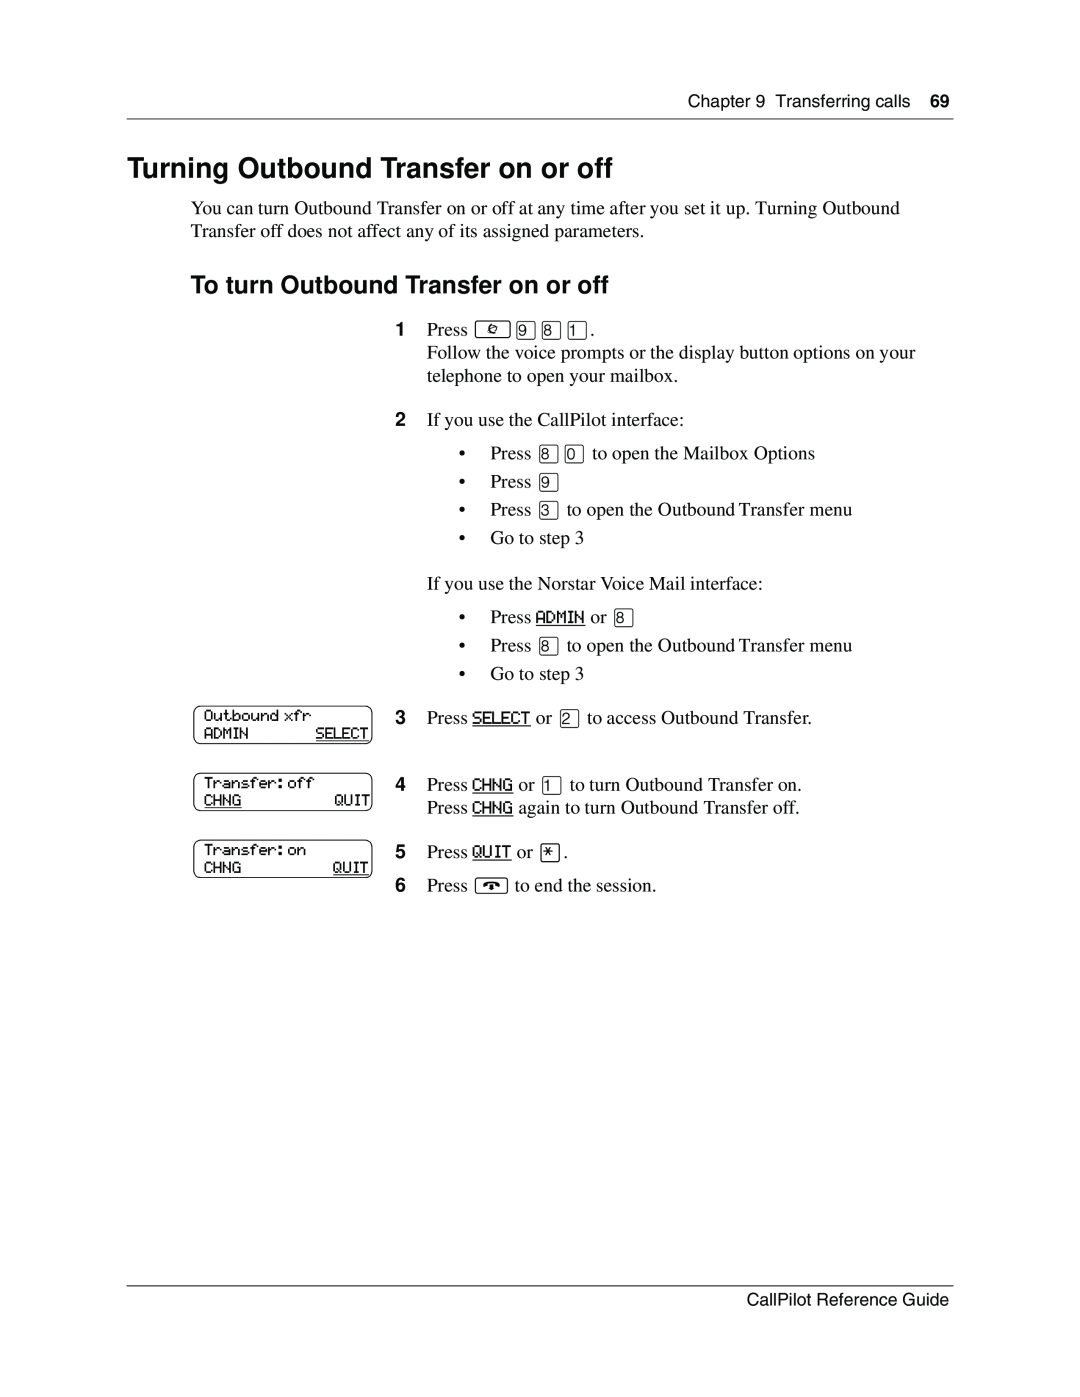 Nortel Networks CallPilot manual Turning Outbound Transfer on or off, To turn Outbound Transfer on or off, Press QUIT or 